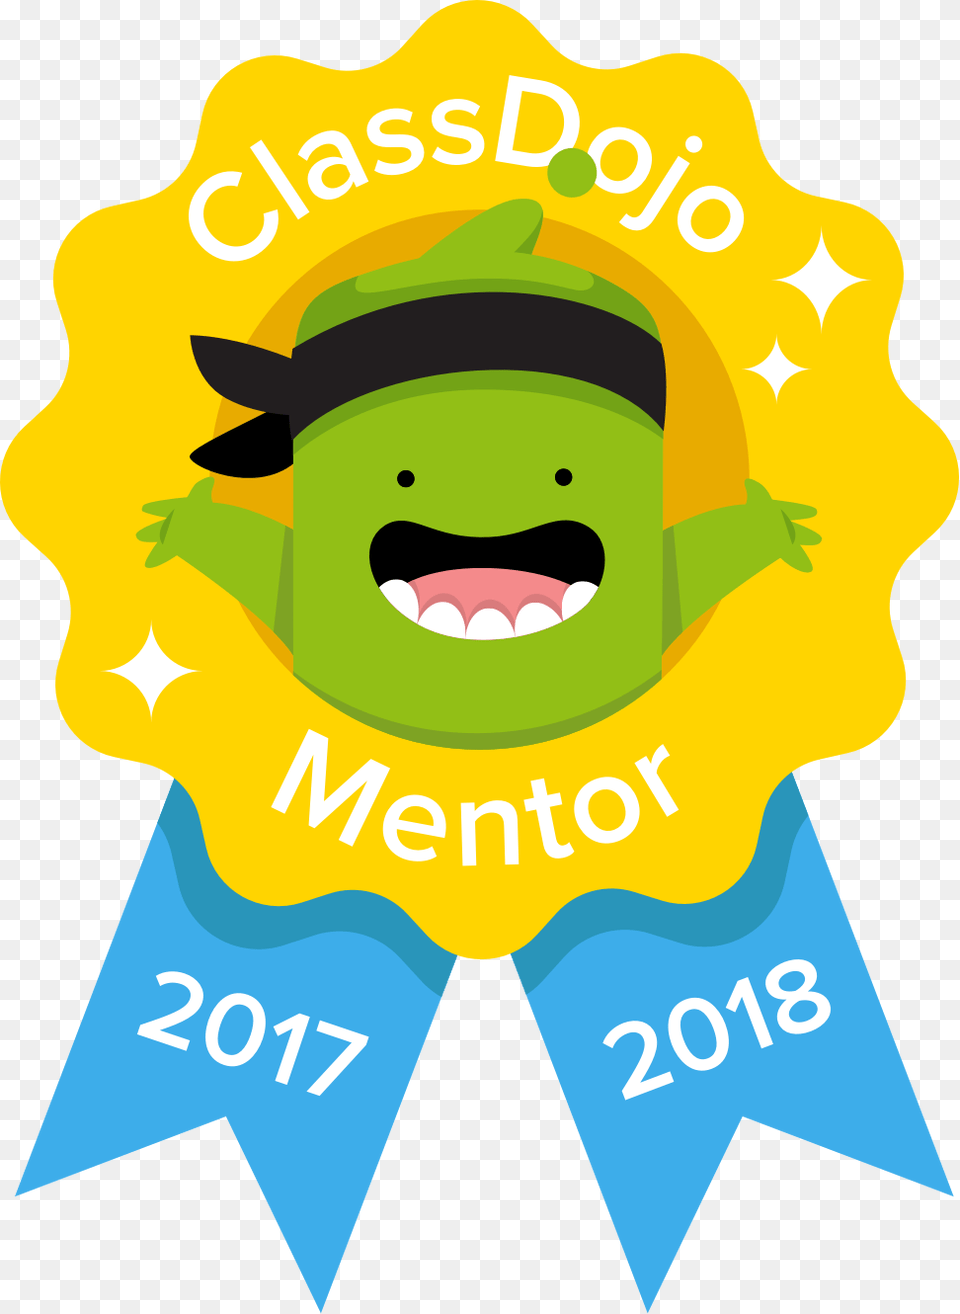 Teaching In The 21st Century Class Dojo Mentor Badge, Logo, Symbol, Baby, Person Free Png